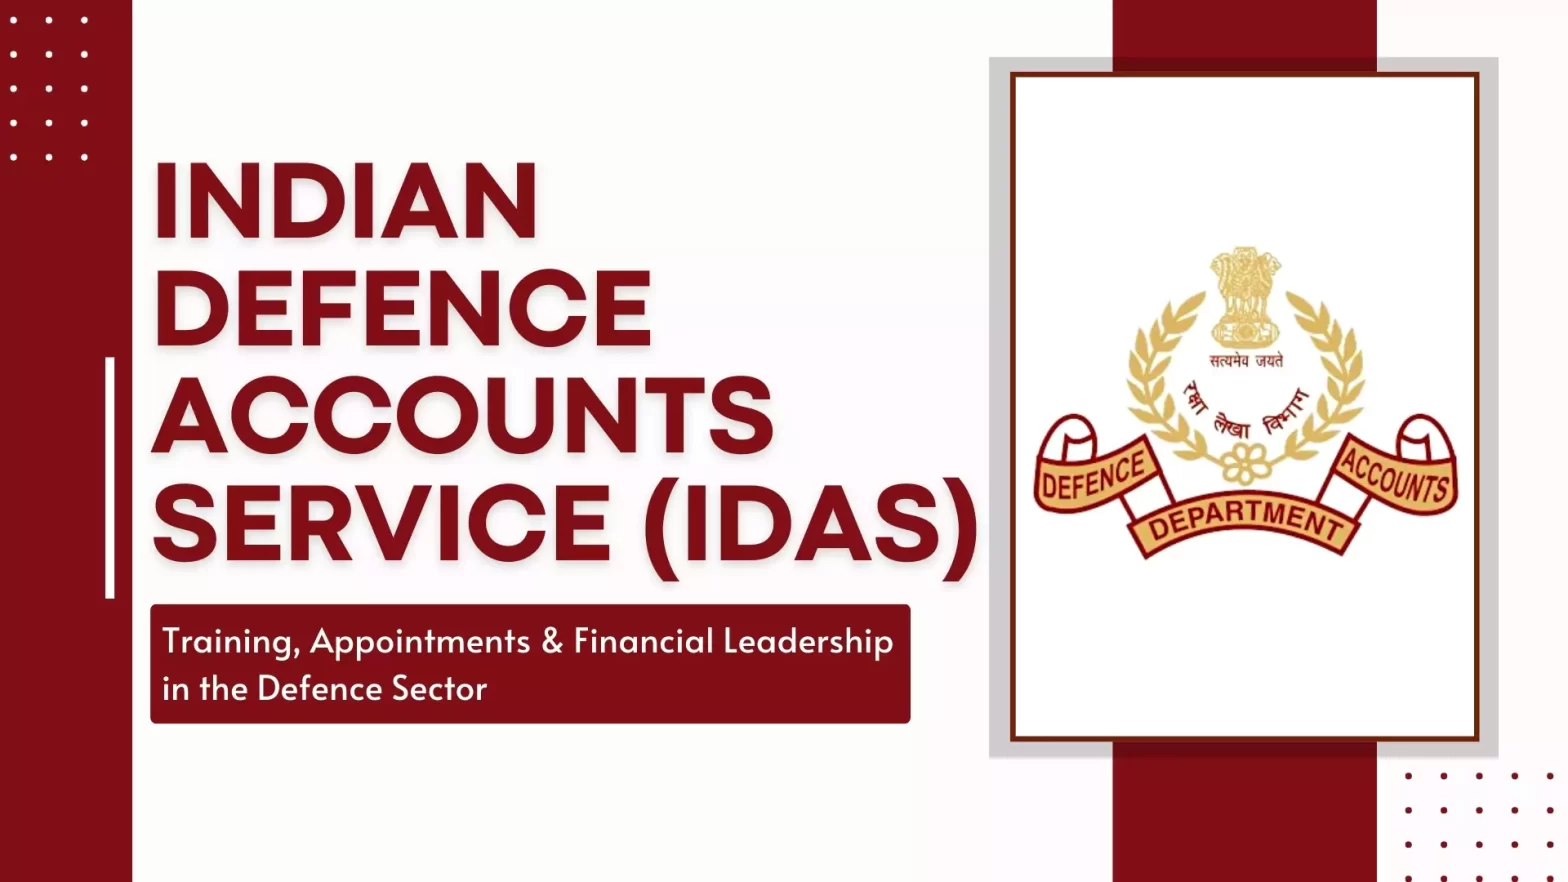 Indian Defence Accounts Service (IDAS): Training, Appointments & Financial Leadership in the Defence Sector